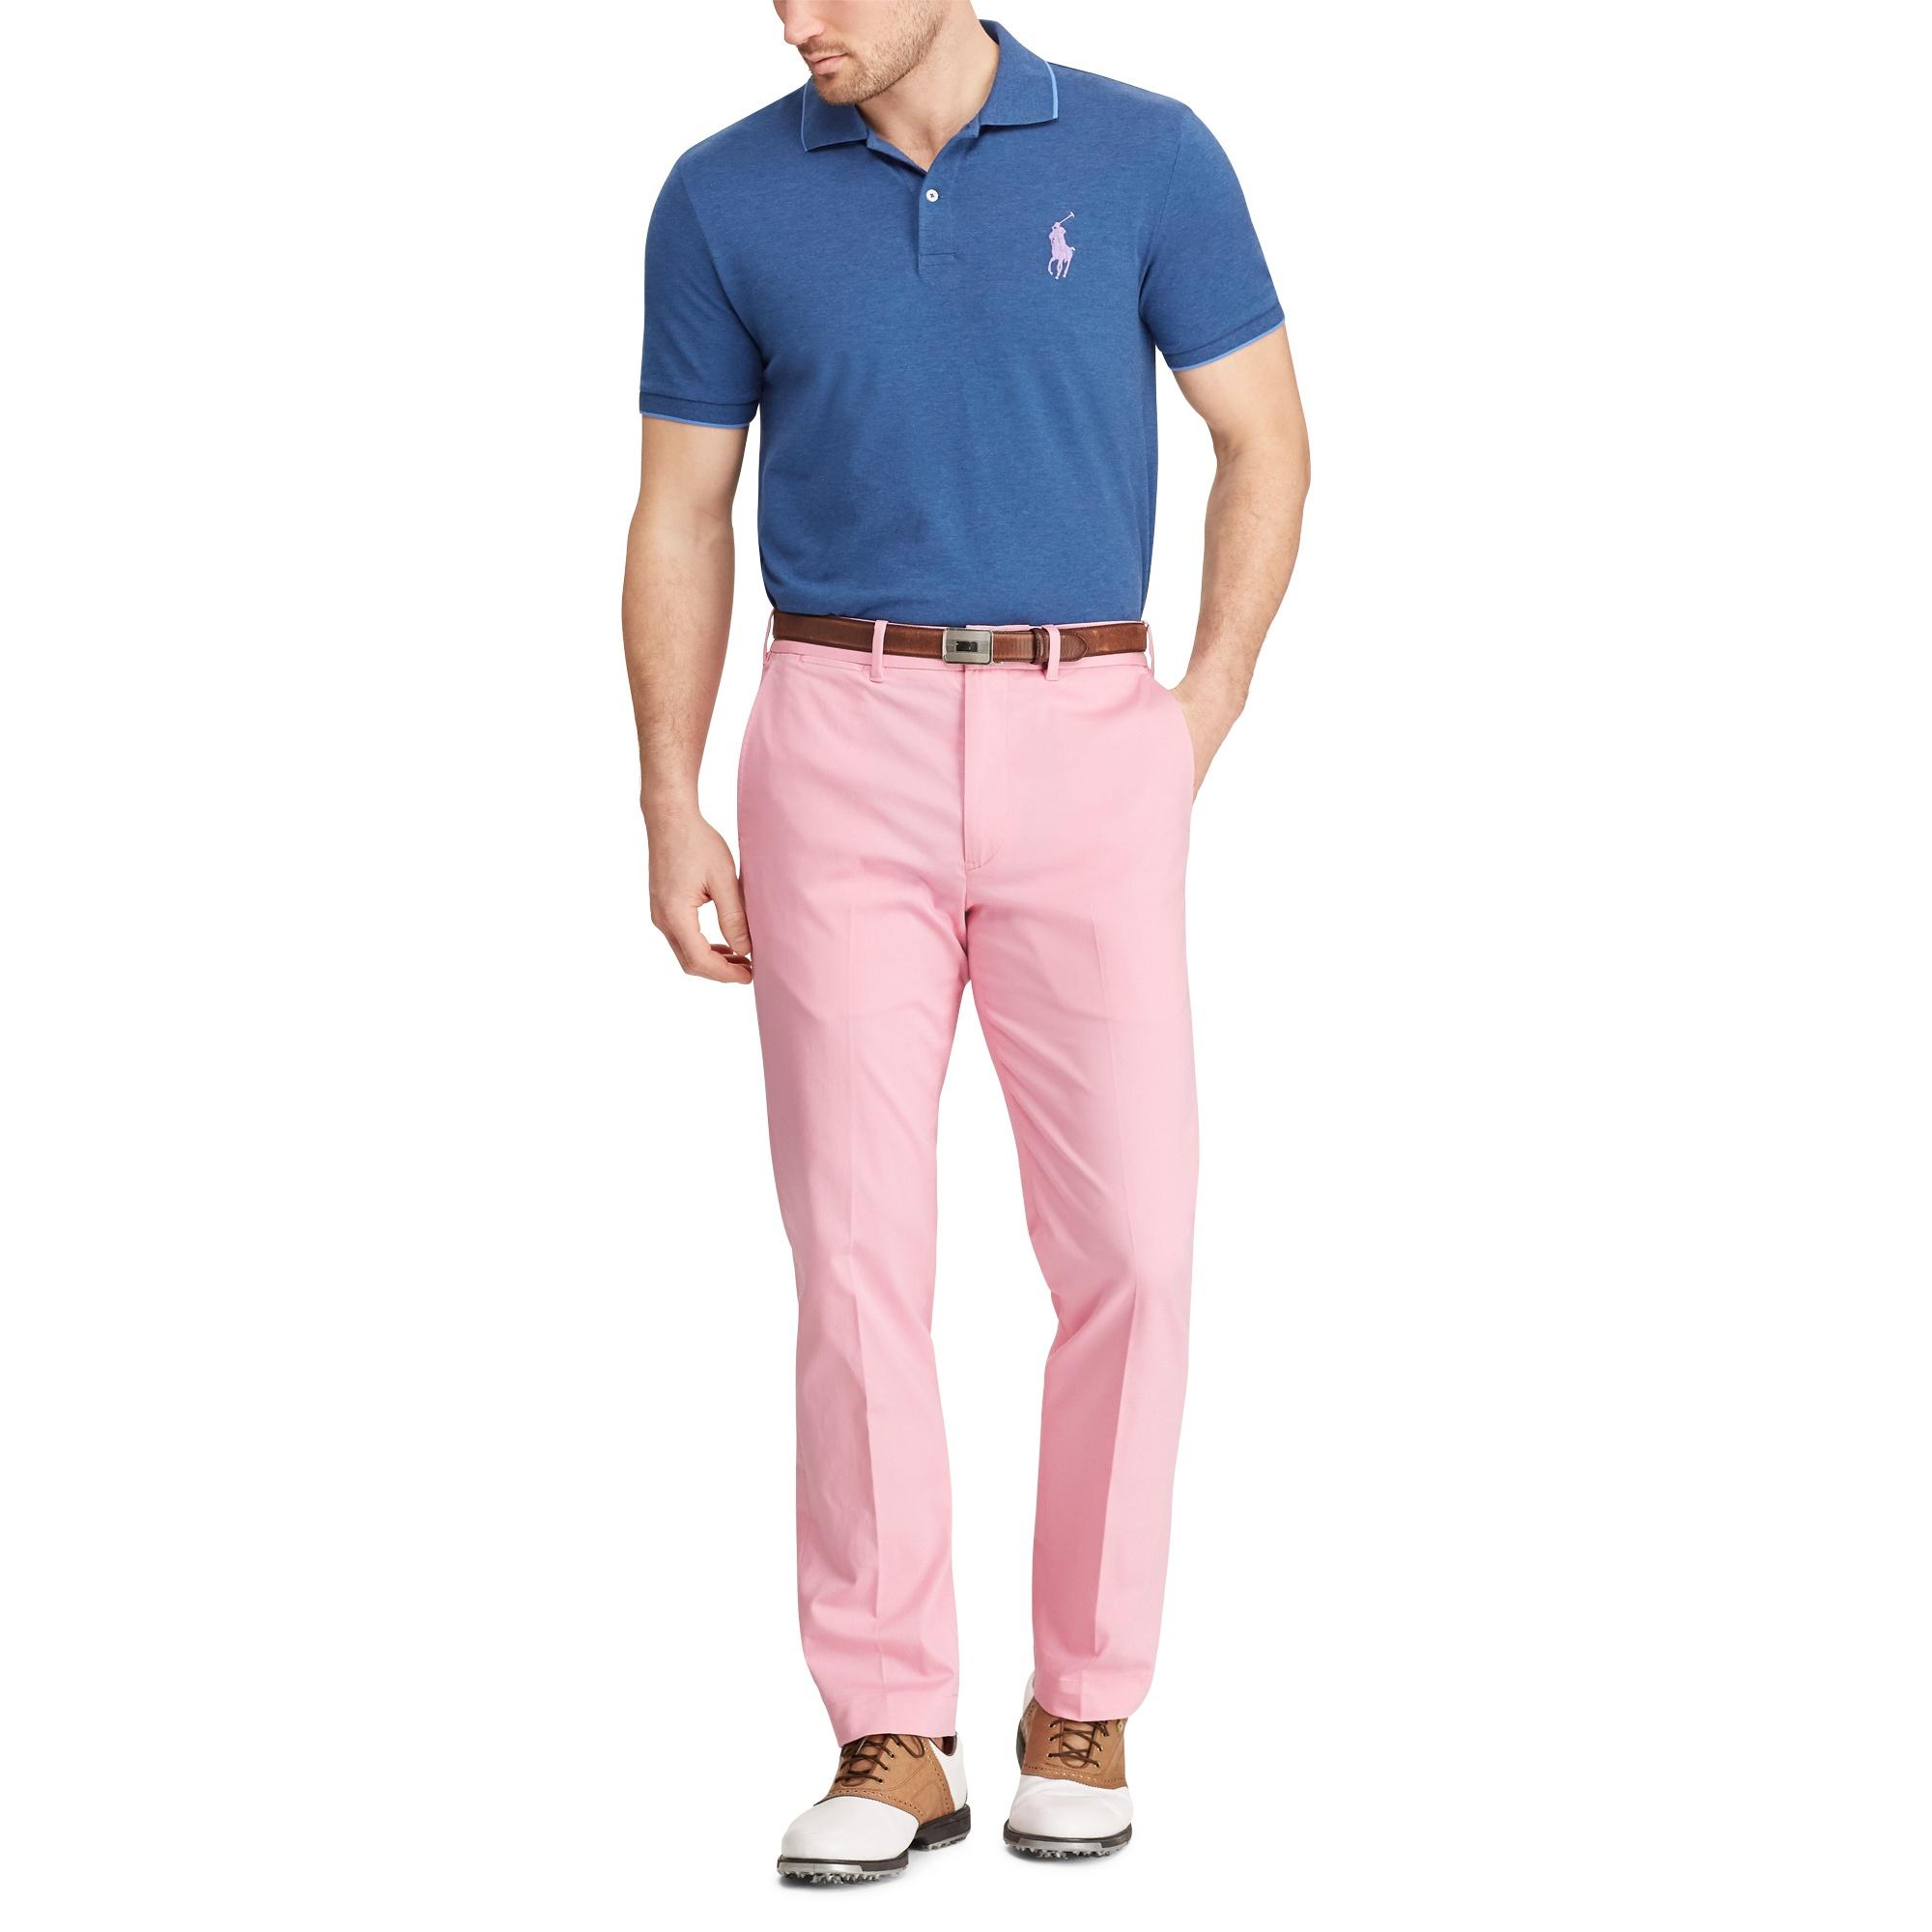 Ralph Lauren Cotton Tailored Fit Stretch Golf Pant in Pink Flamingo (Pink)  for Men - Lyst